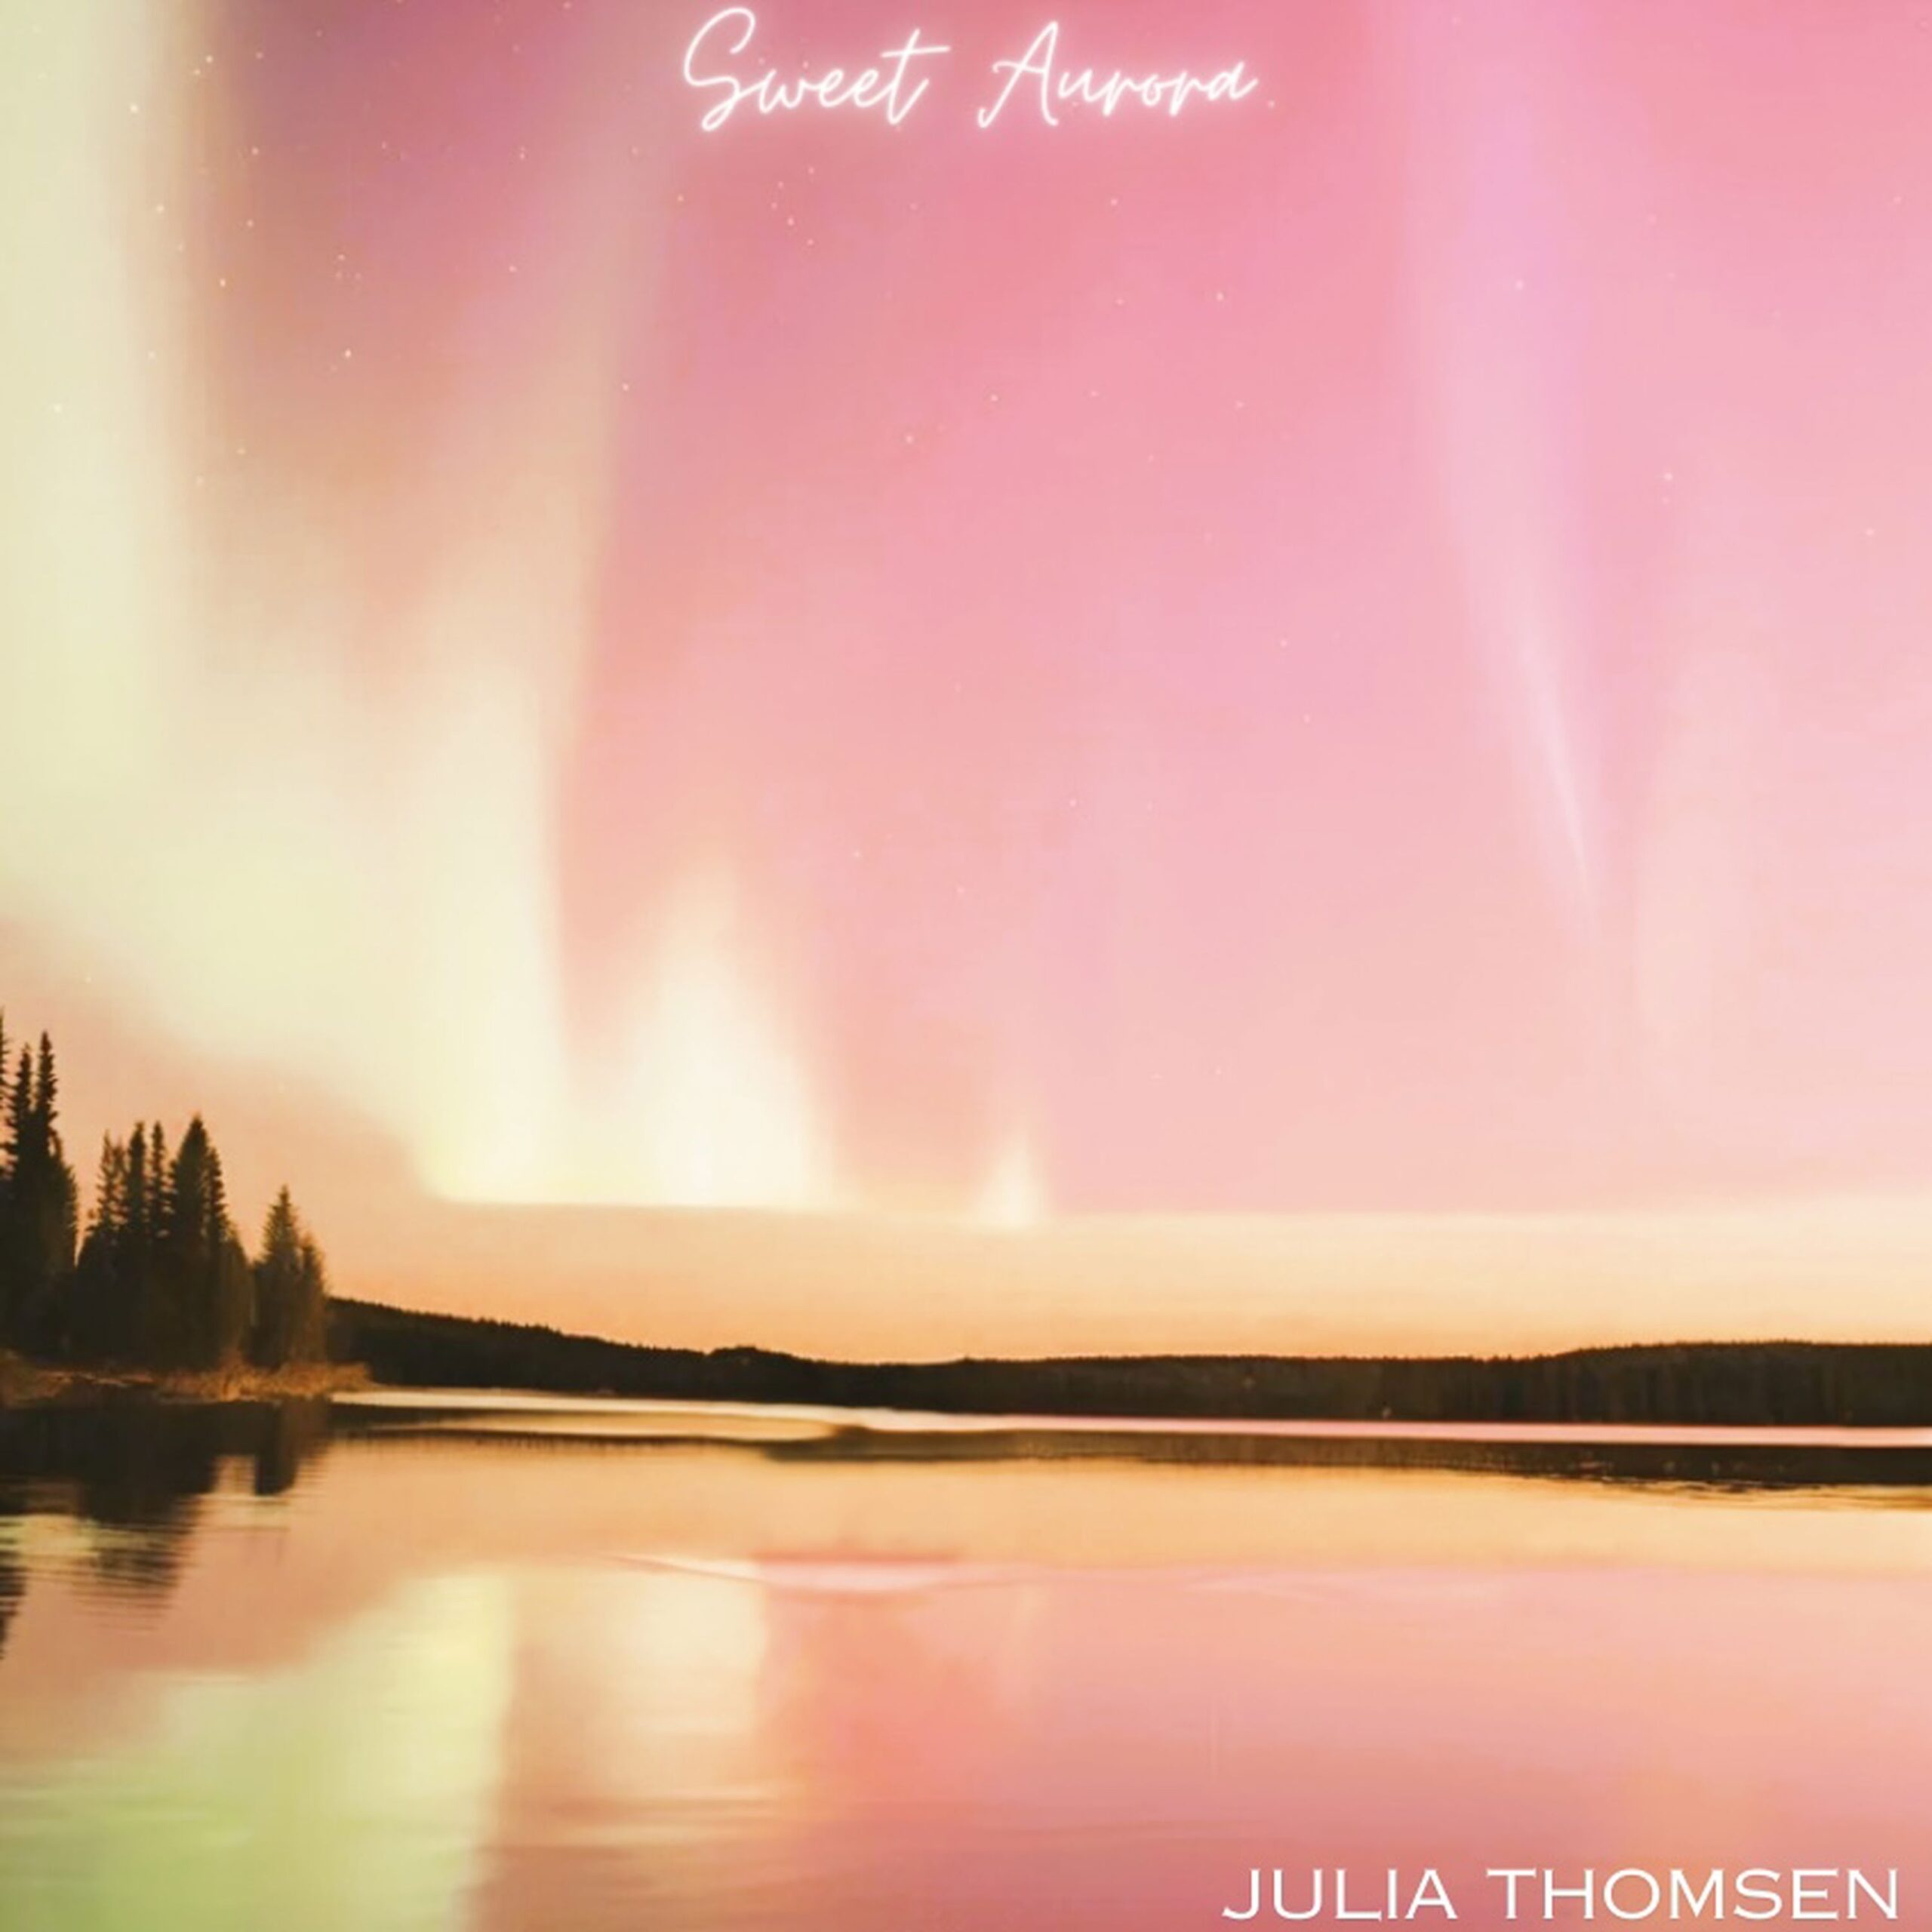 Julia Thomsen To Release New Composition “Sweet Aurora”